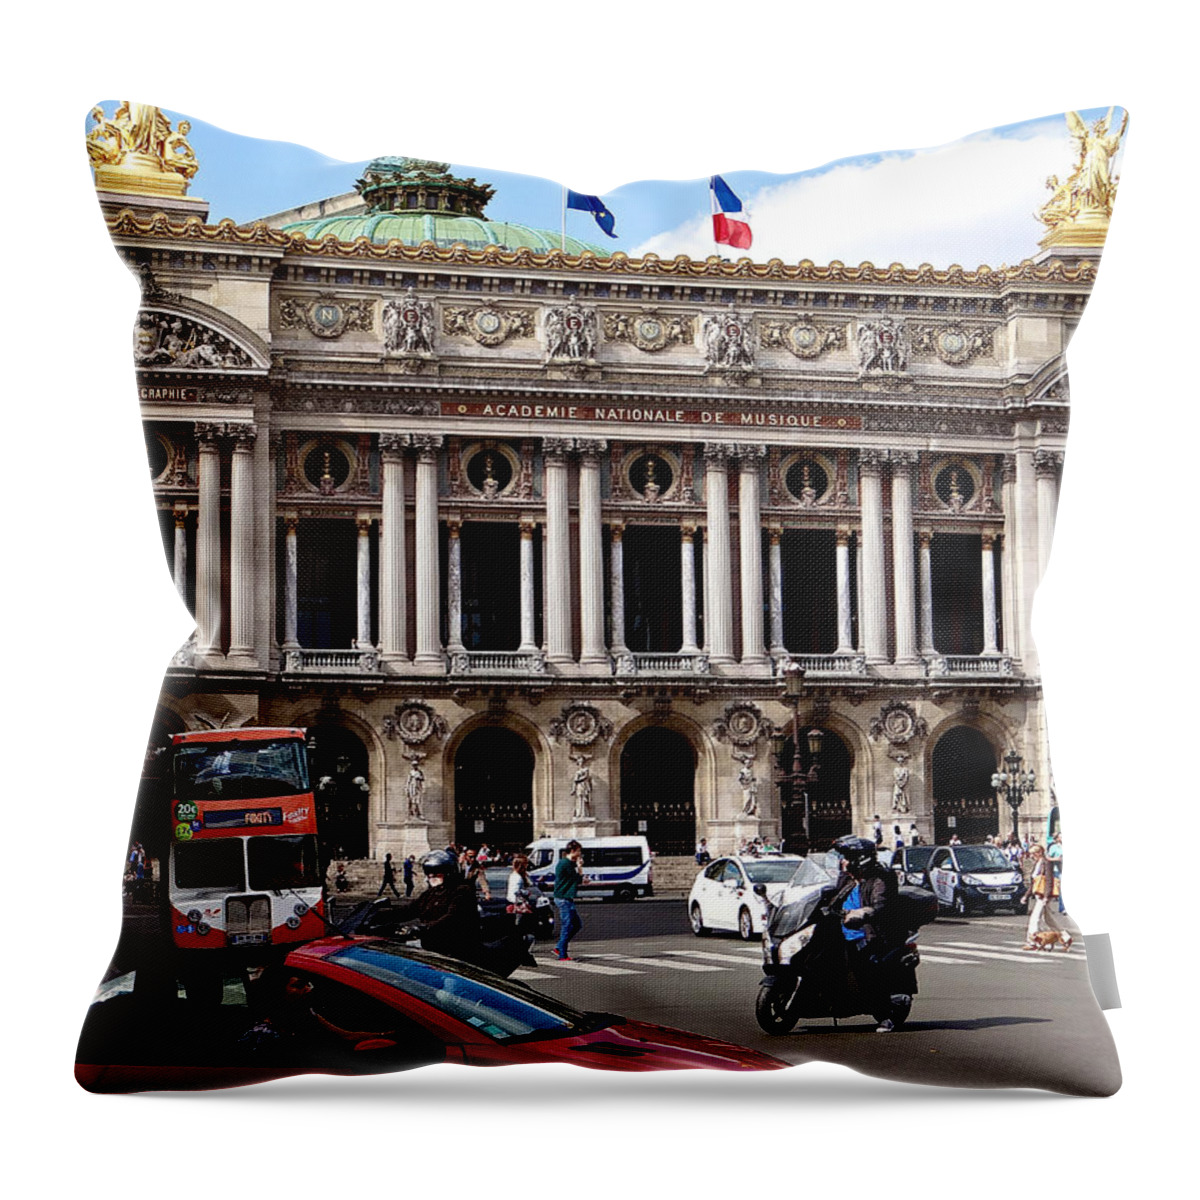 Place De L' Opera Throw Pillow featuring the photograph Opera Place by Ira Shander